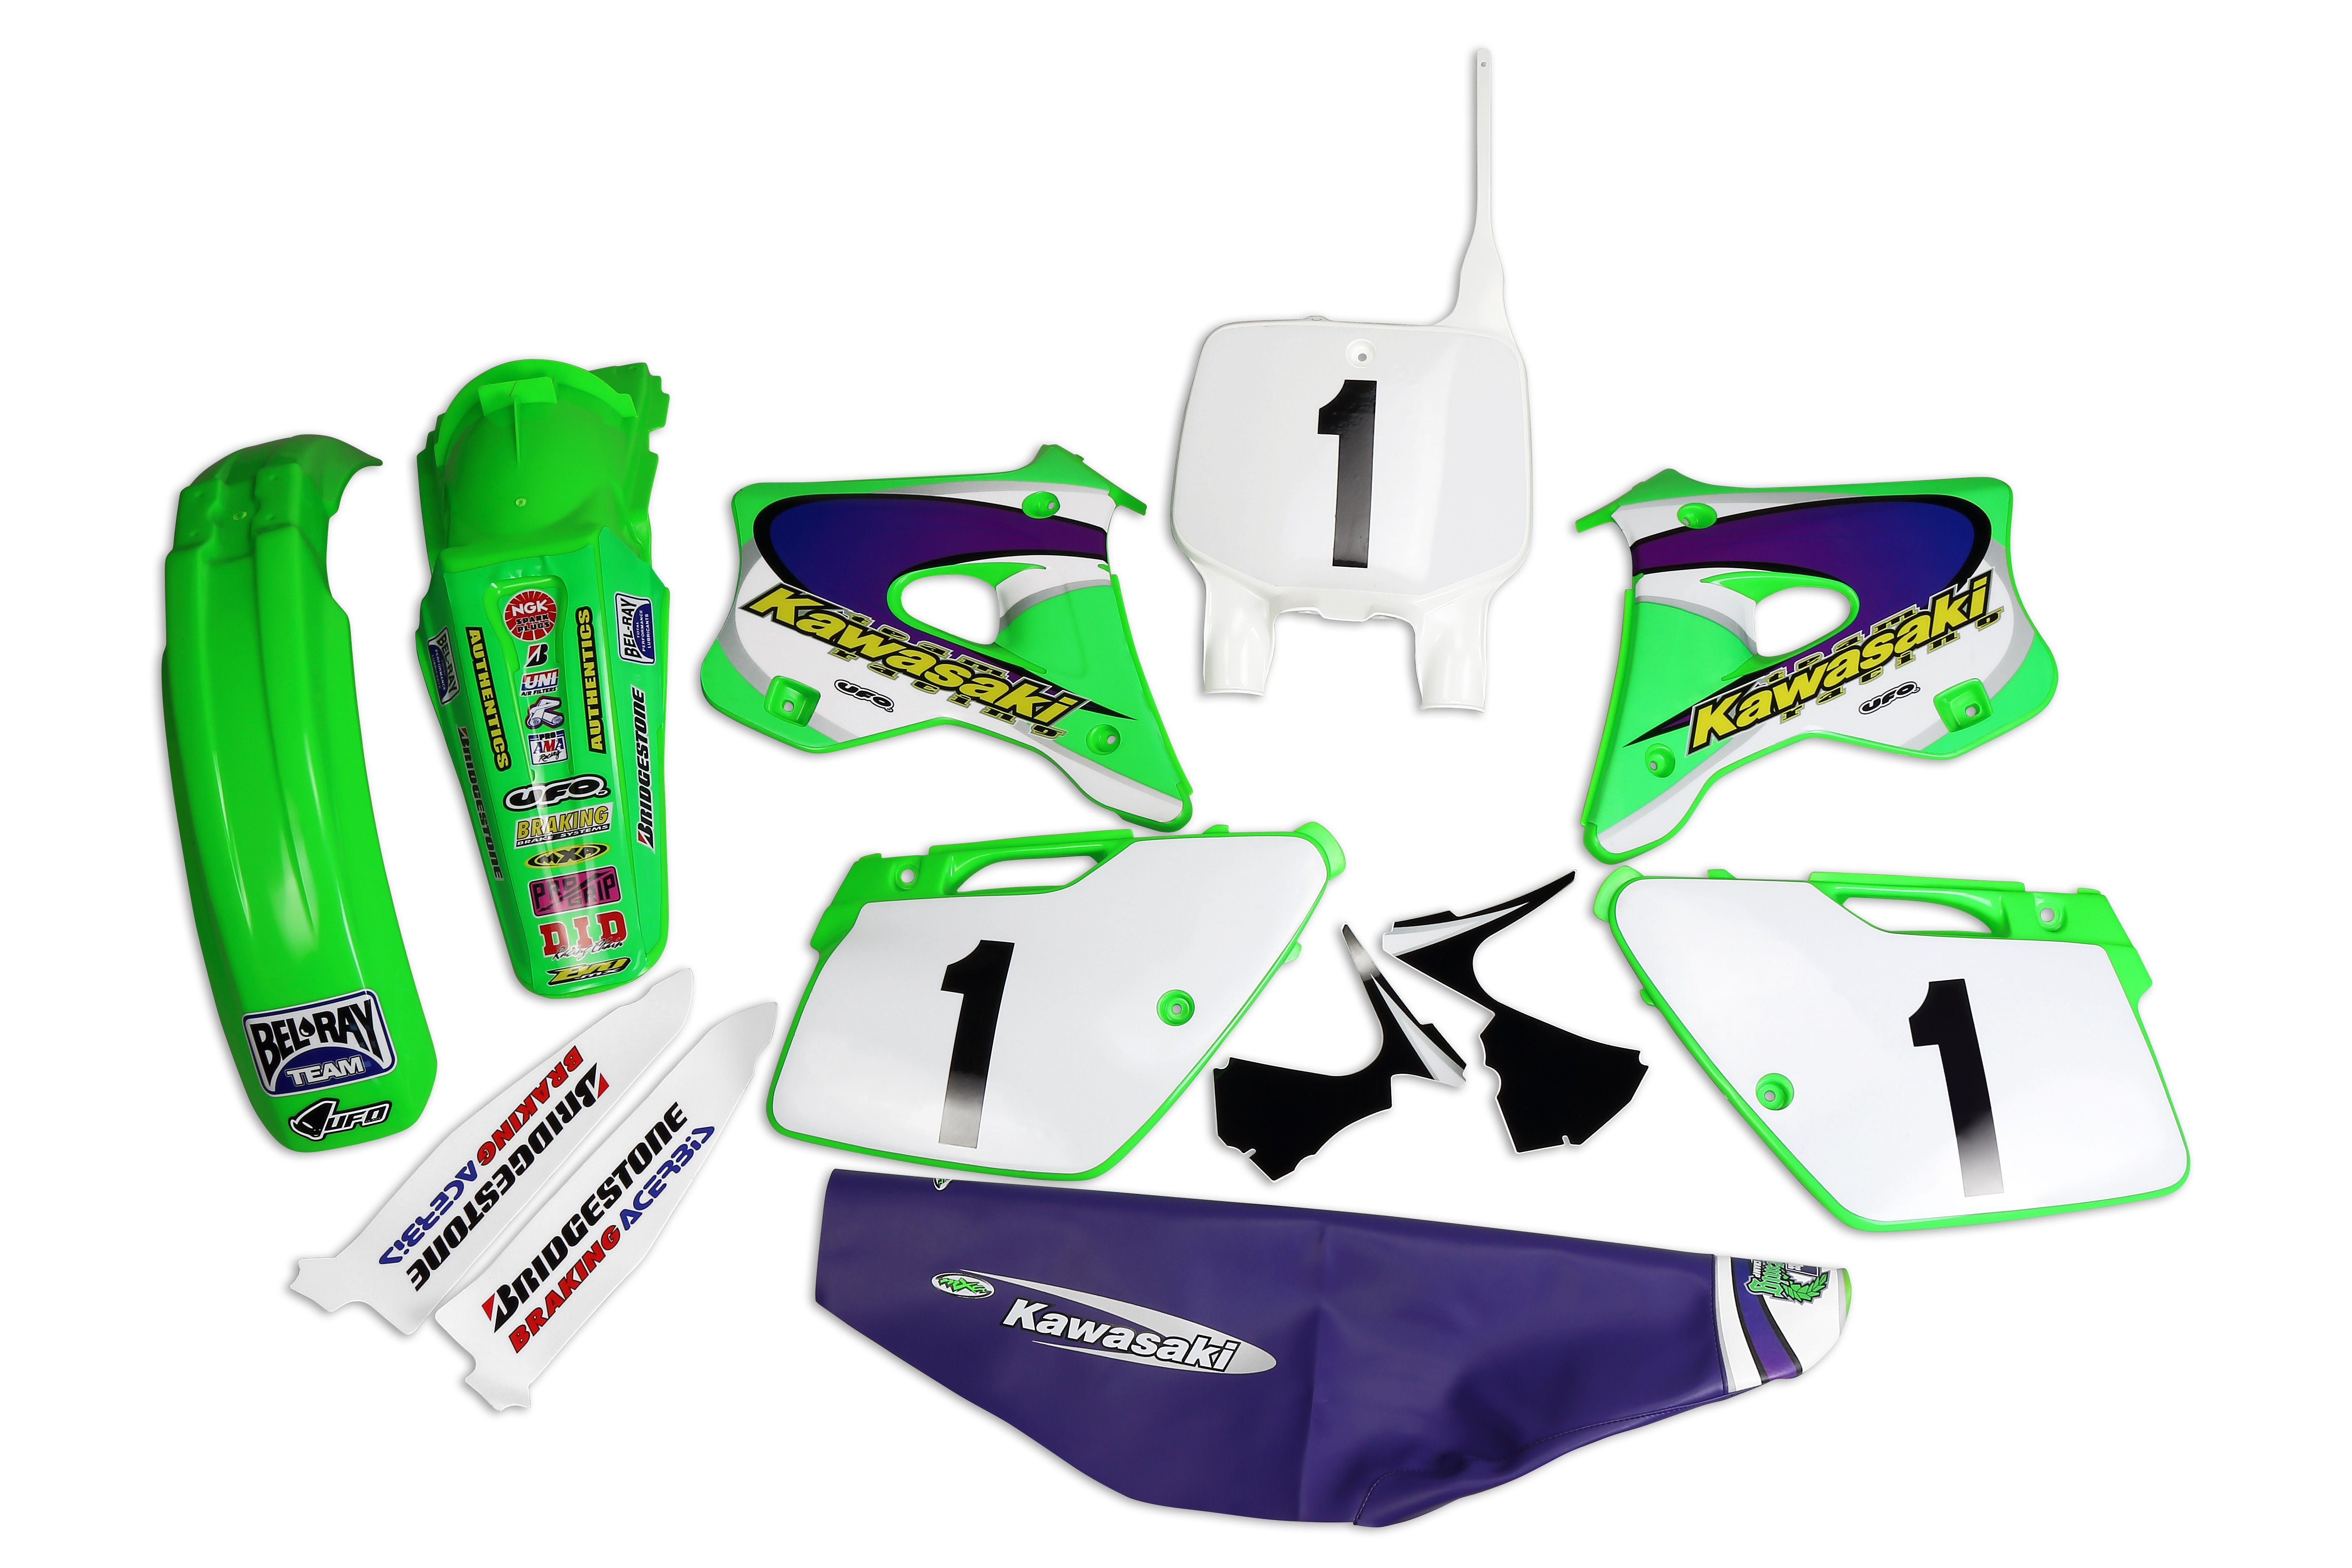 Replica KIT Kawasaki KX 125/250 1994-98 Emig Team USA, includes all Parts in the picture